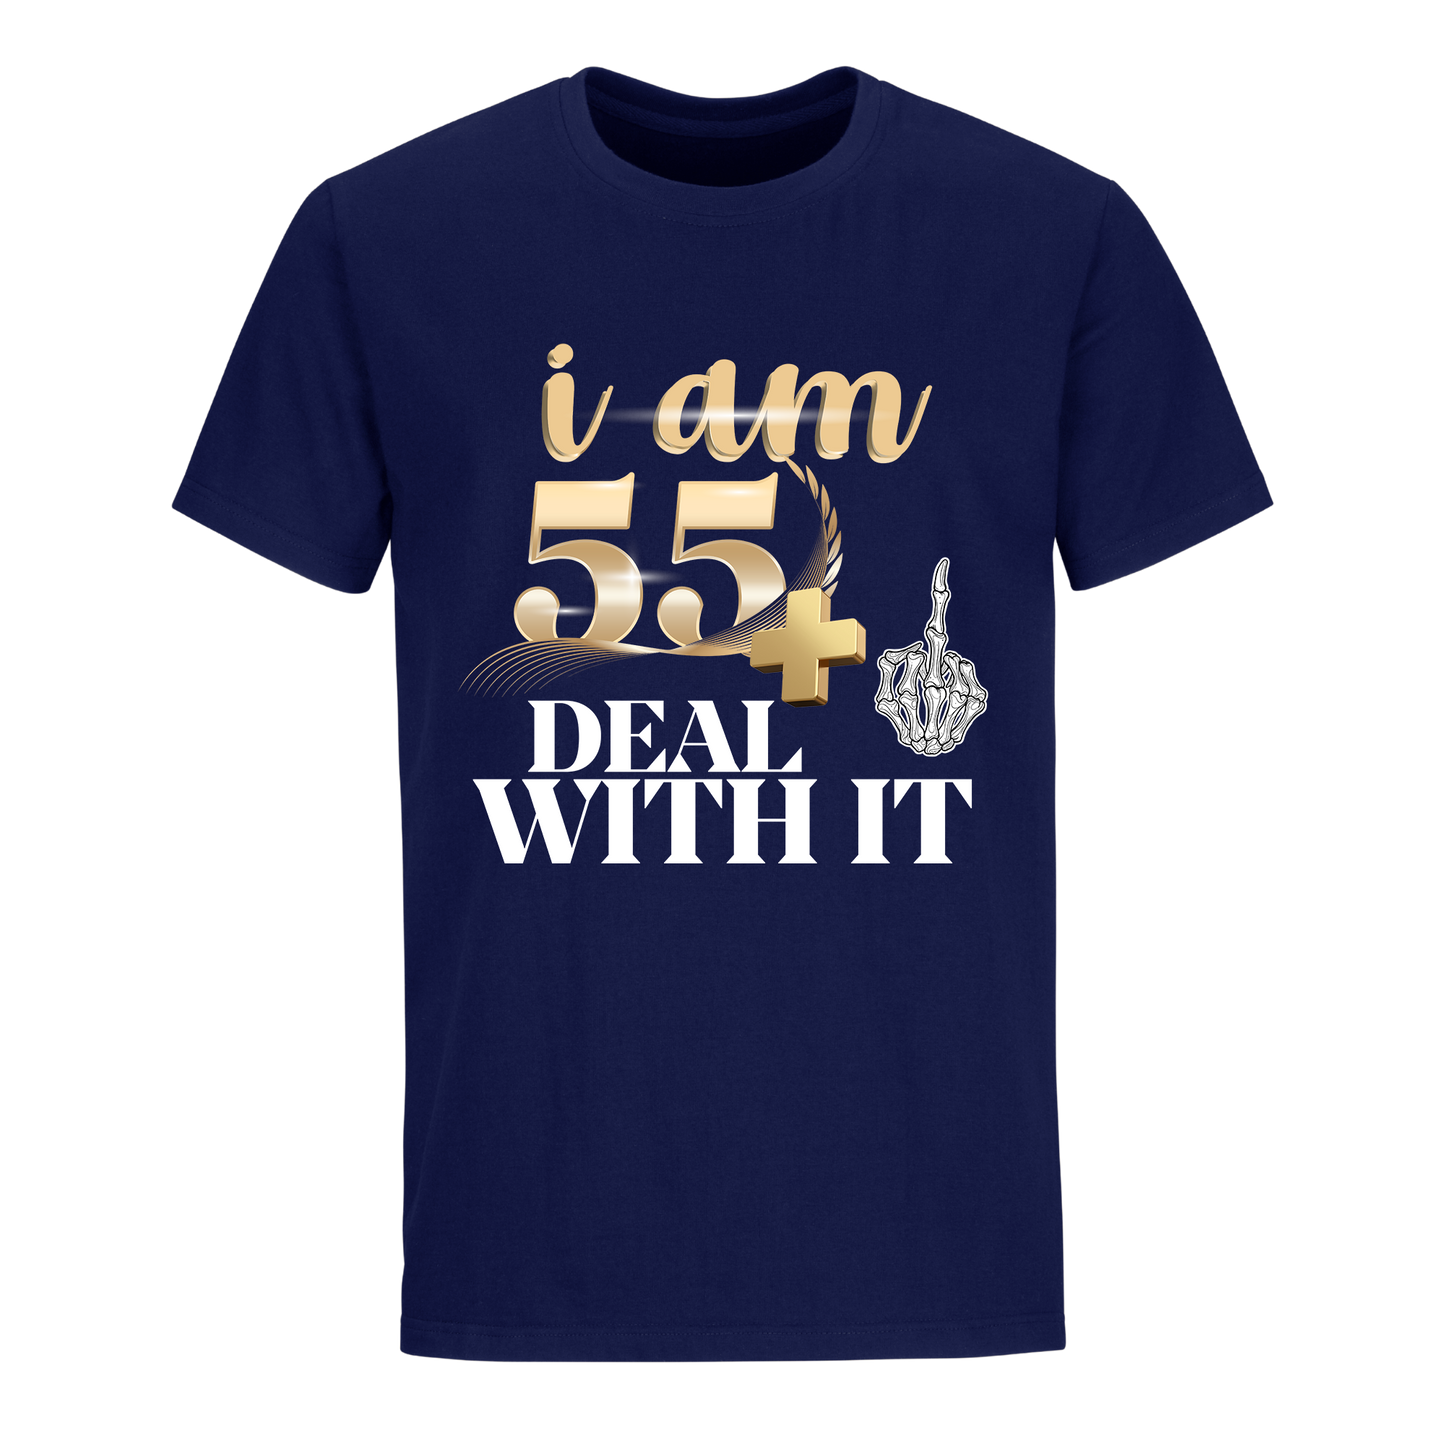 I'M 55 DEAL WITH IT UNISEX SHIRT